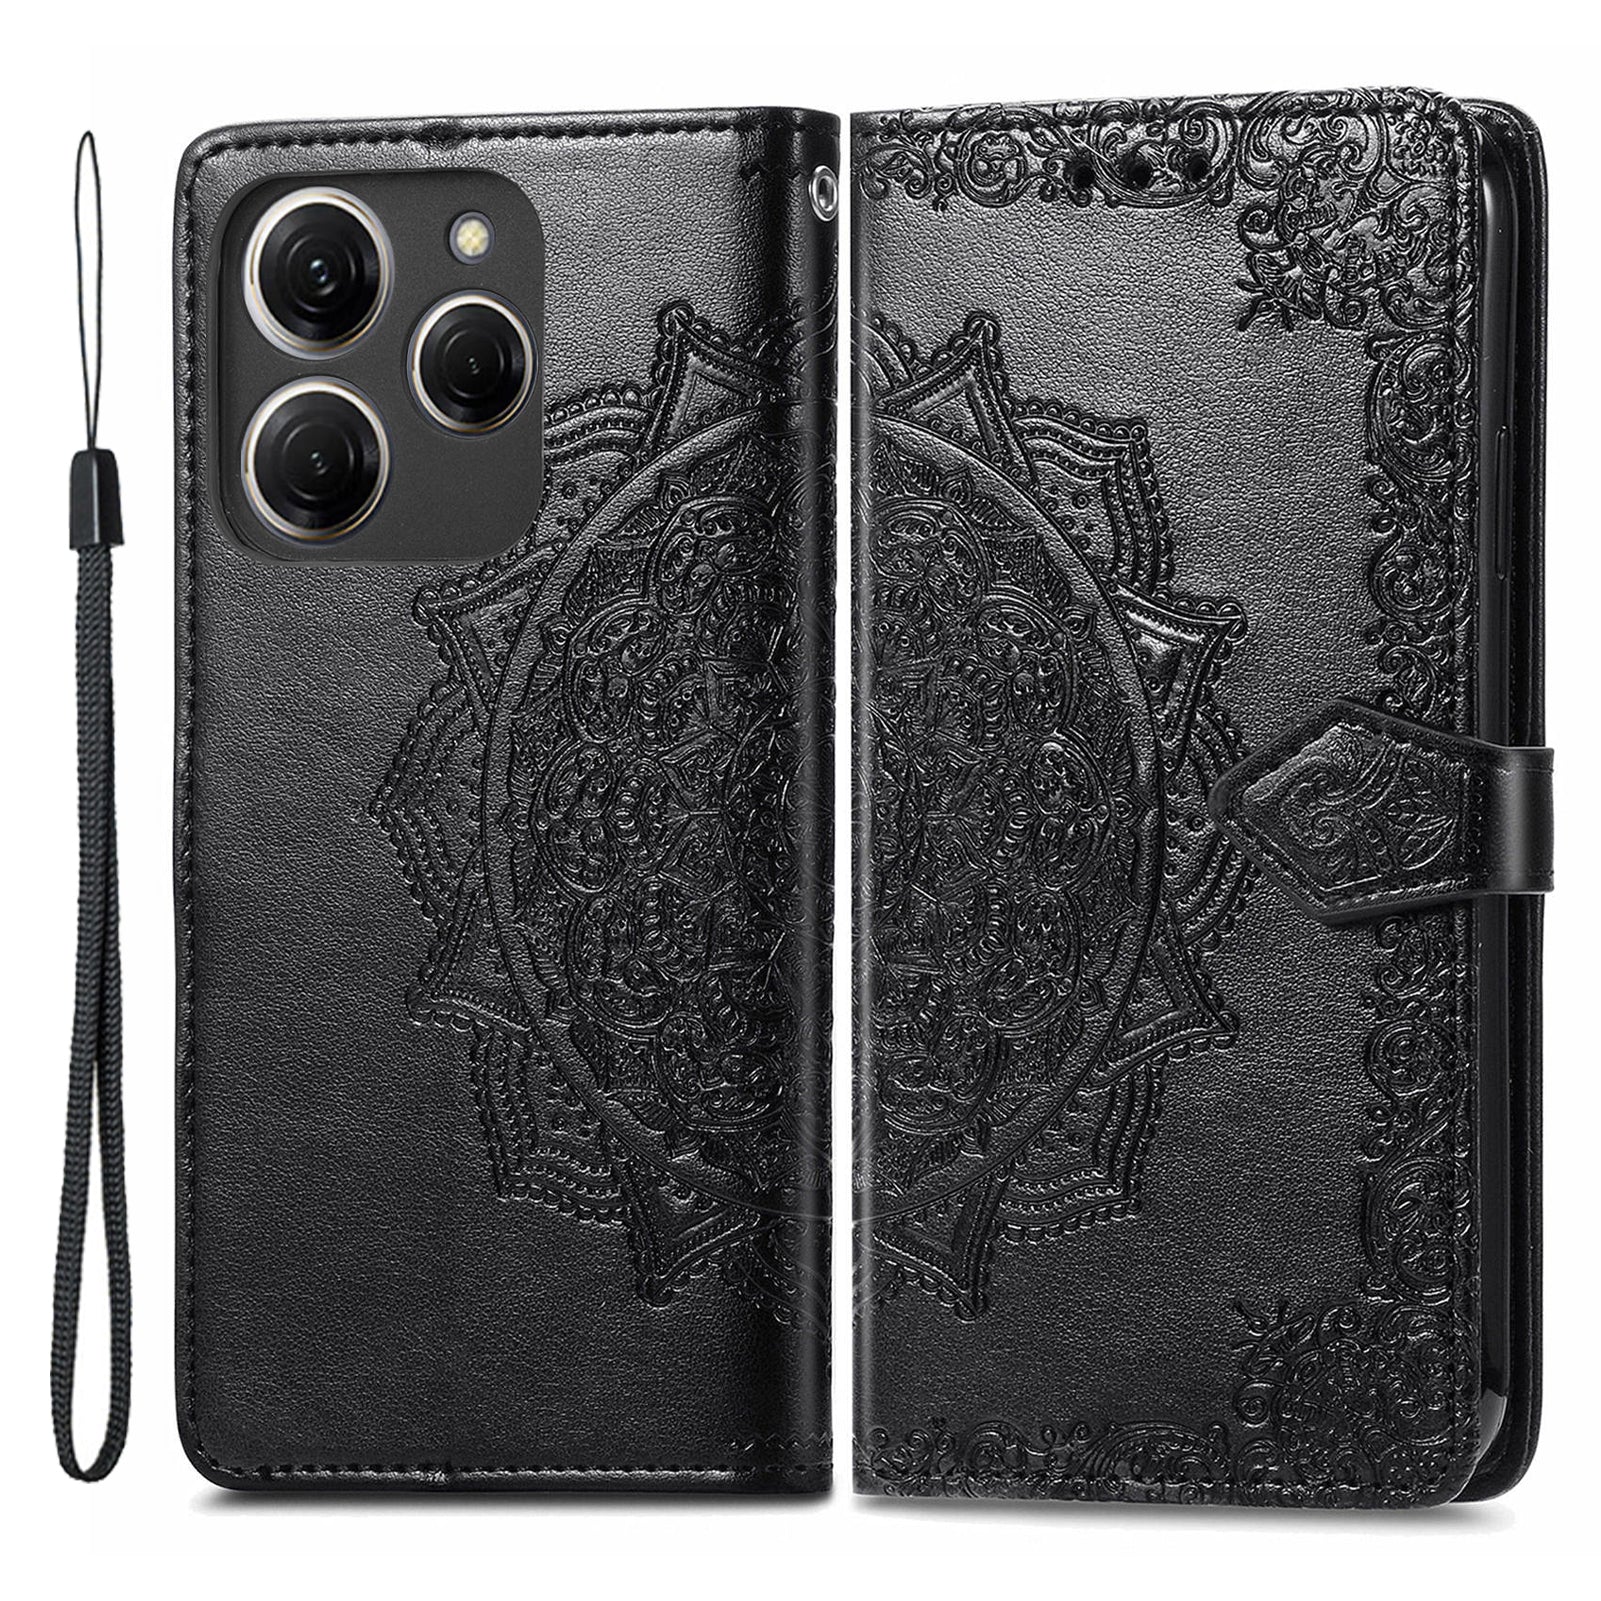 For Transsion Tecno Spark 20 Pro Phone Cover Emboss Mandala Flower Leather Wallet Case - Black